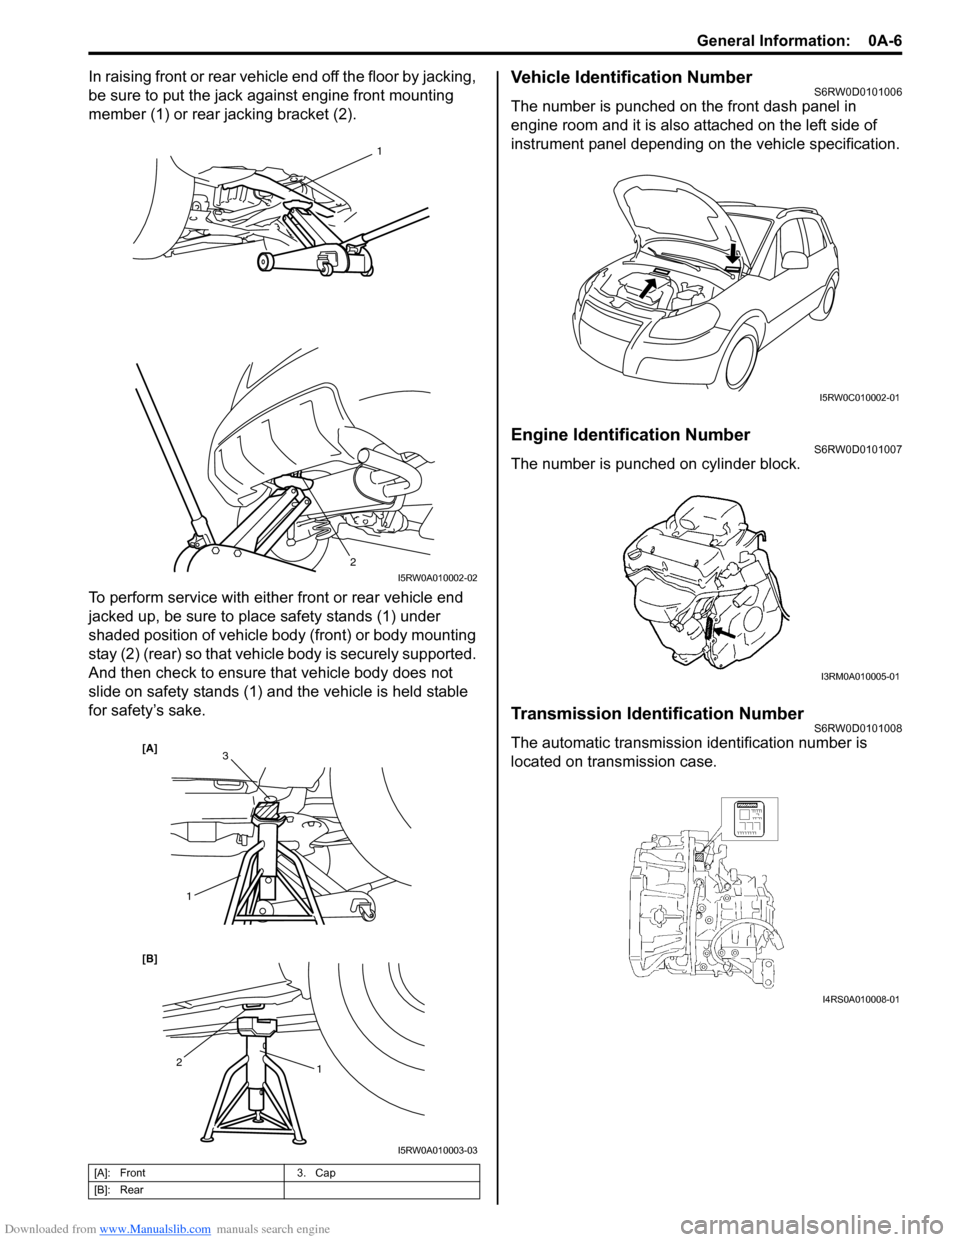 SUZUKI SX4 2006 1.G Service Workshop Manual Downloaded from www.Manualslib.com manuals search engine General Information:  0A-6
In raising front or rear vehicle end off the floor by jacking, 
be sure to put the jack against engine front mountin